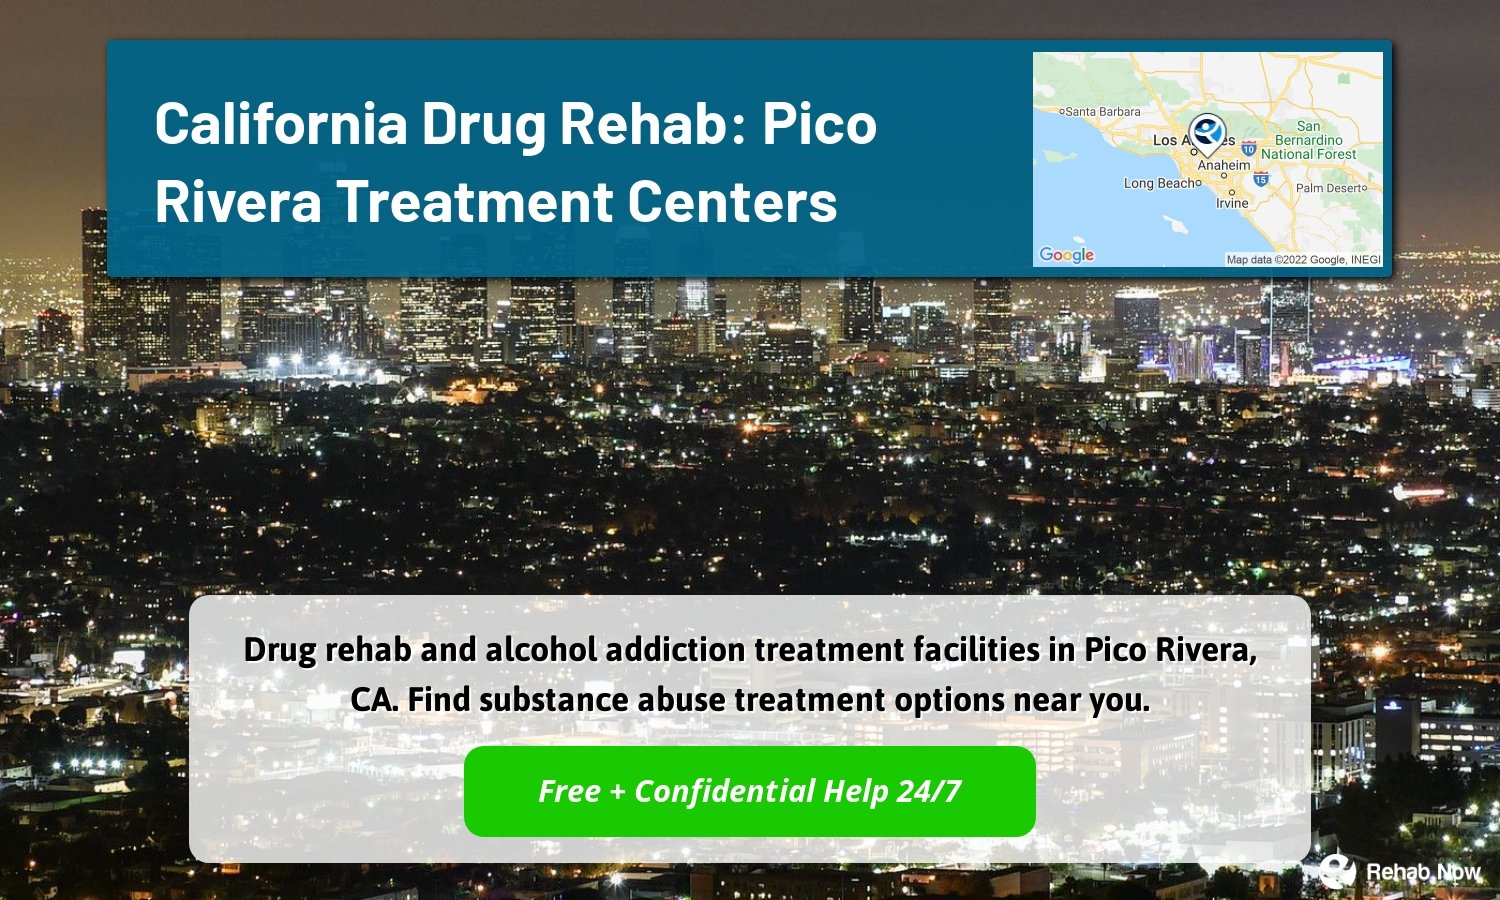 Drug rehab and alcohol addiction treatment facilities in Pico Rivera, CA. Find substance abuse treatment options near you.